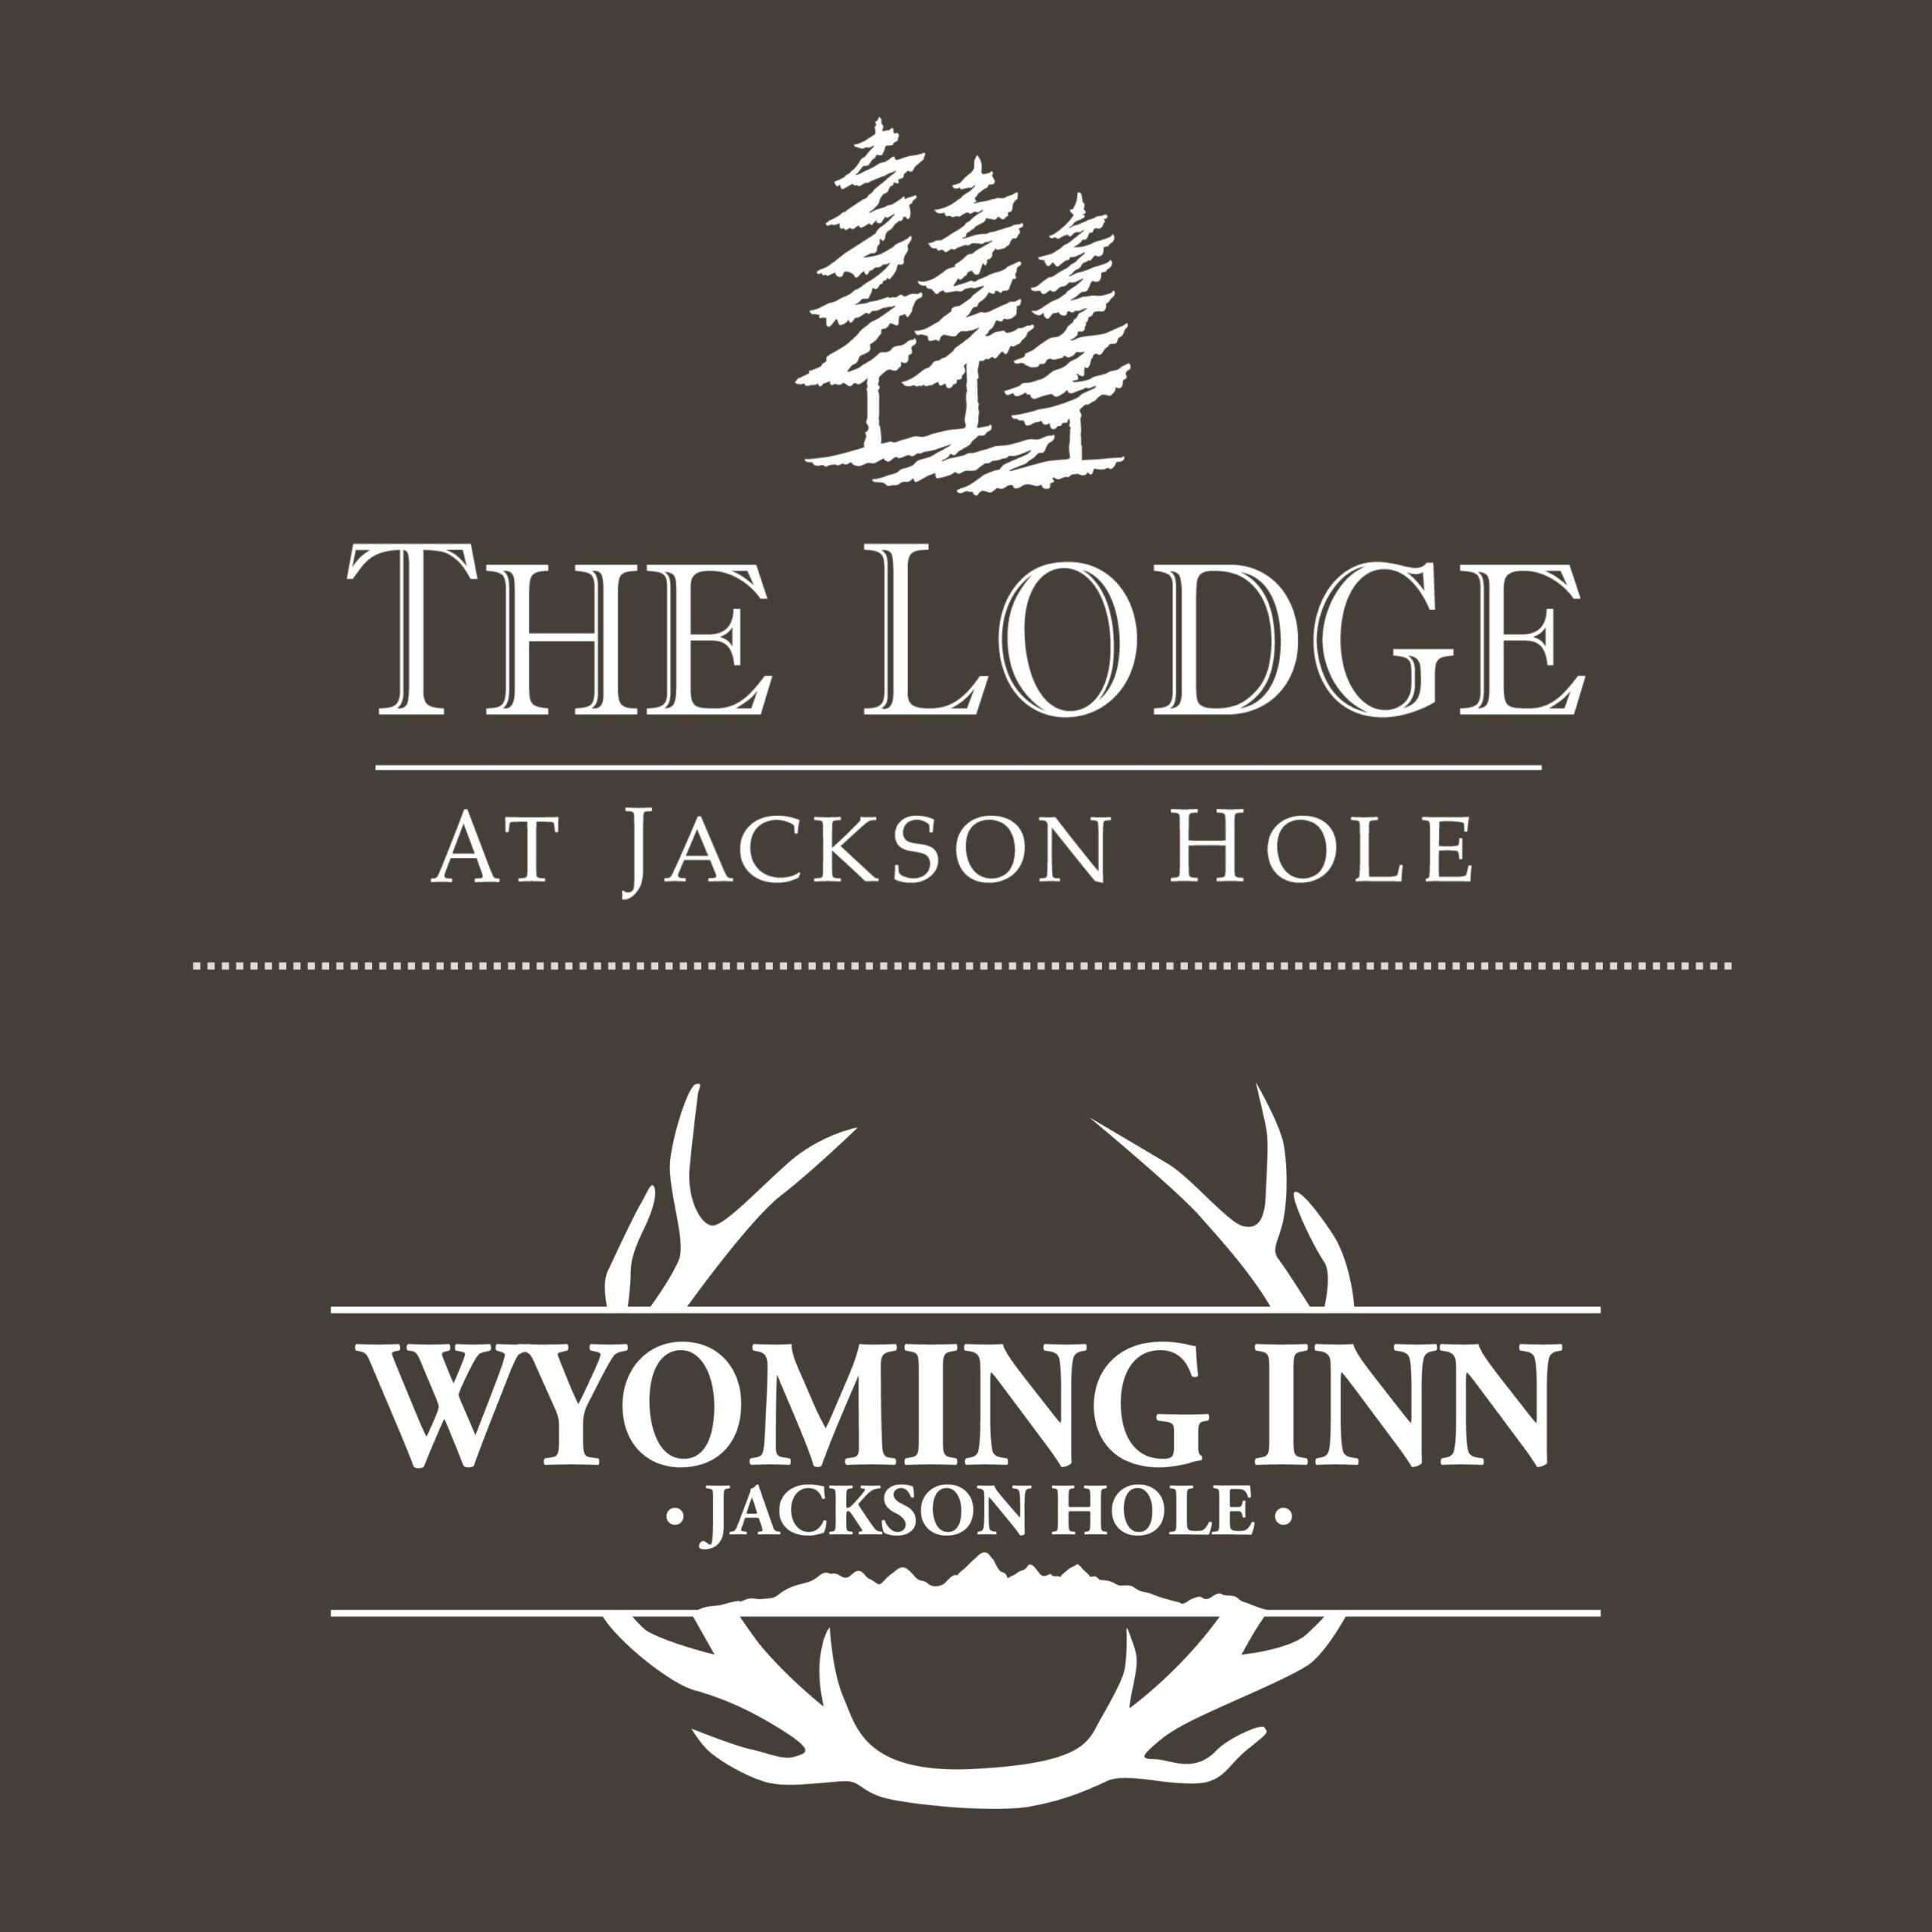 WY Inn and The Lodge logo